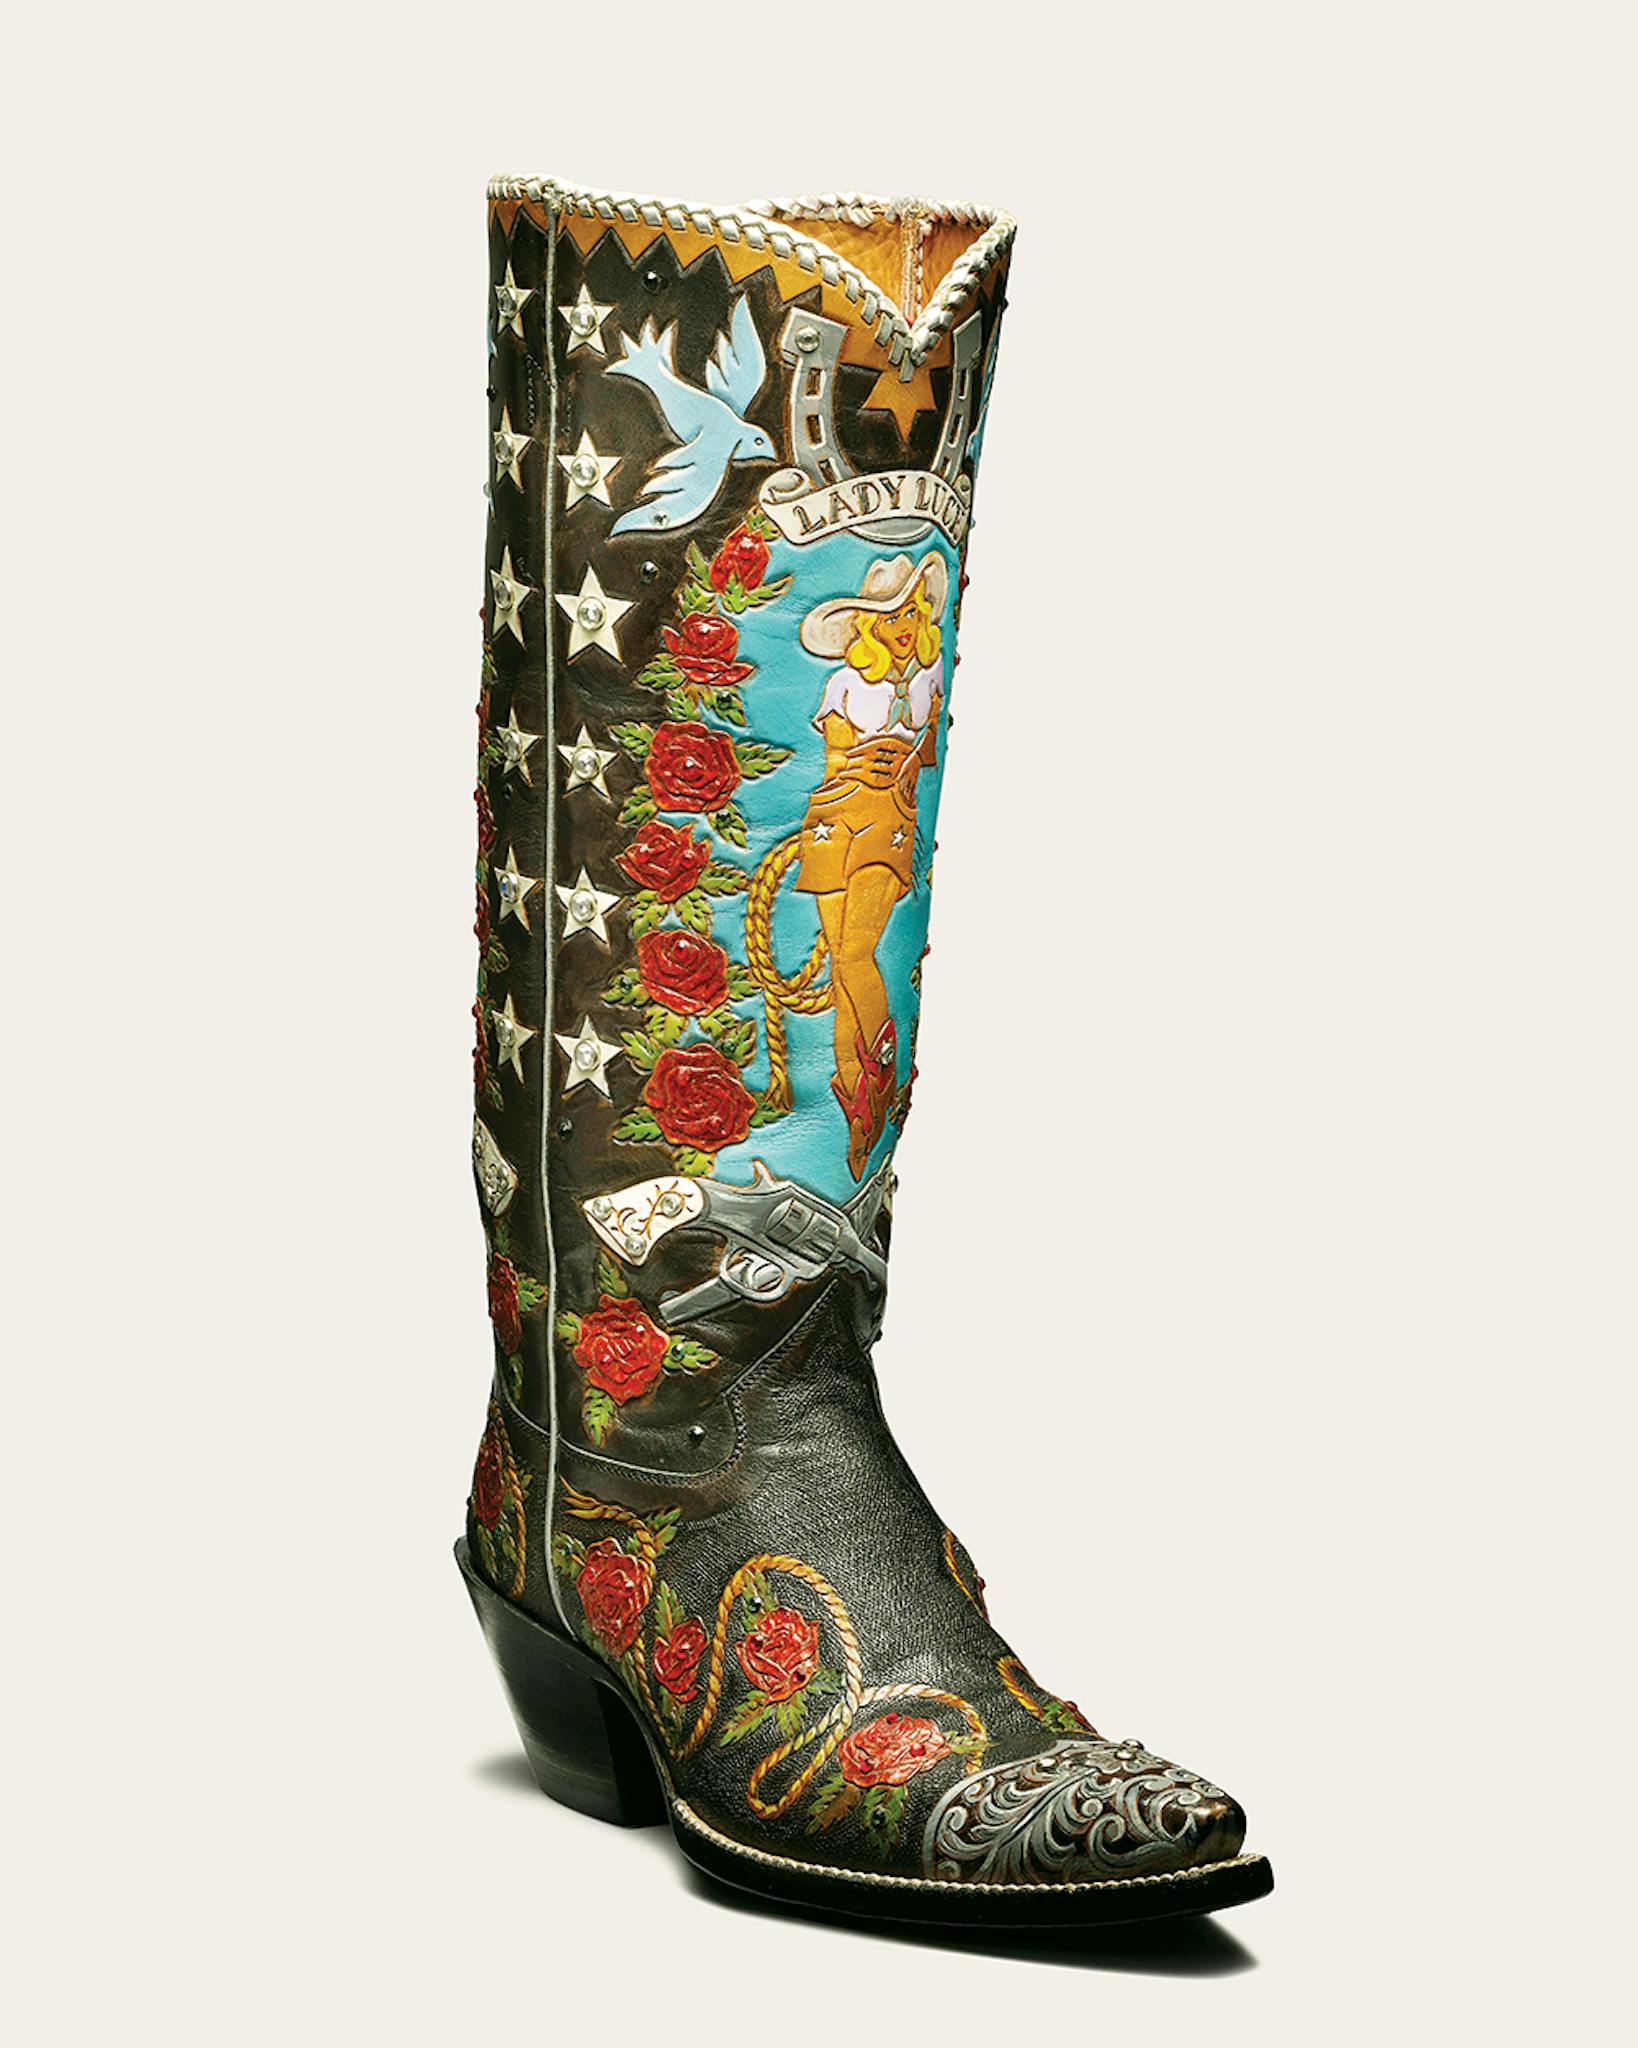 Boot with a woman's silhouette, stars, and roses.